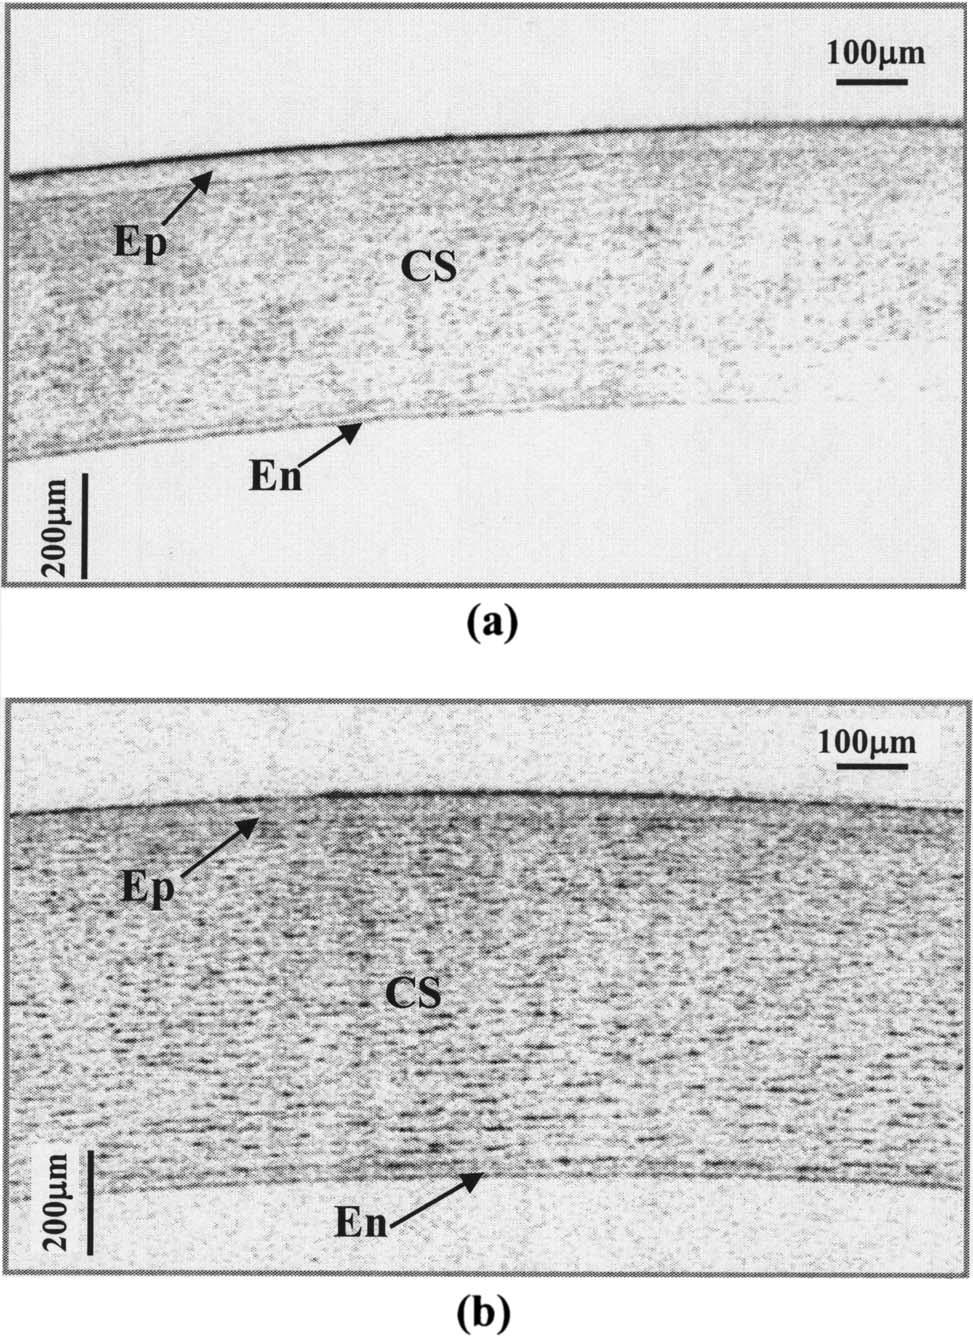 Wang et al. Vol. 22, No. 8/August 2005/J. Opt. Soc. Am. A 1497 Figure 11(a) shows an in vitro OCT image of the rabbit cornea with the SPM light source shown in Fig. 3(b).